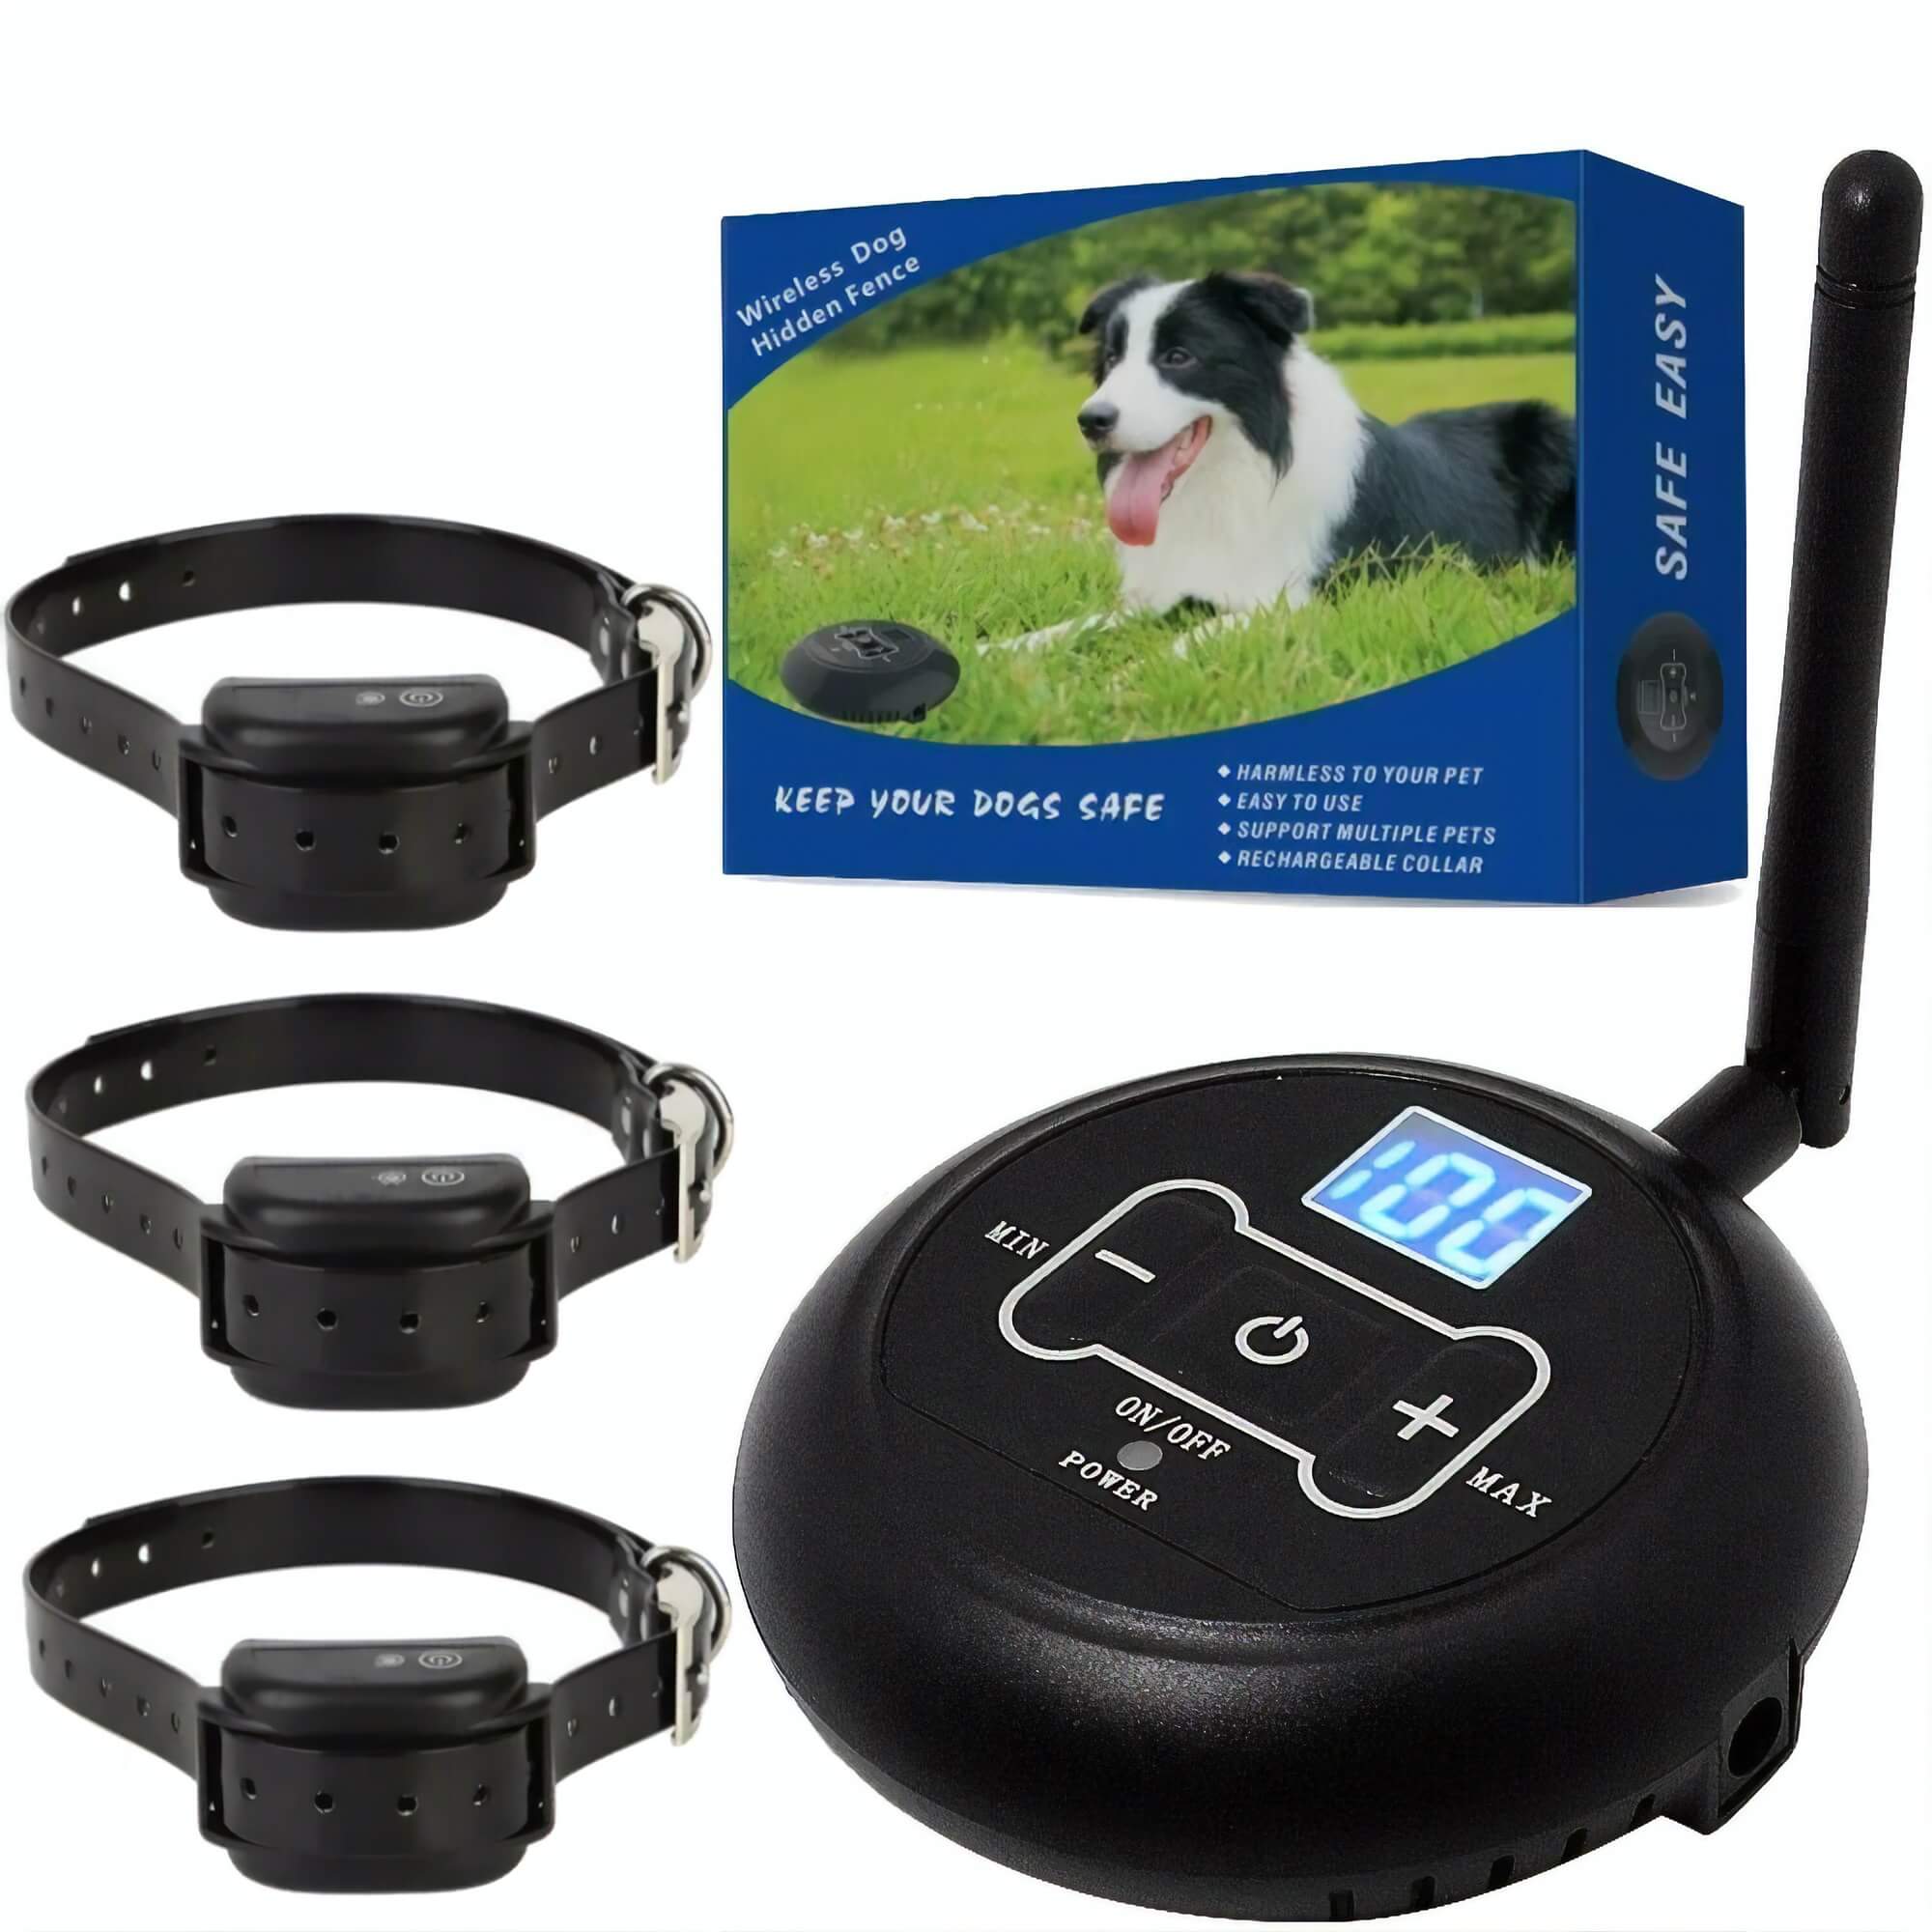 wireless dog fence with 3 collars